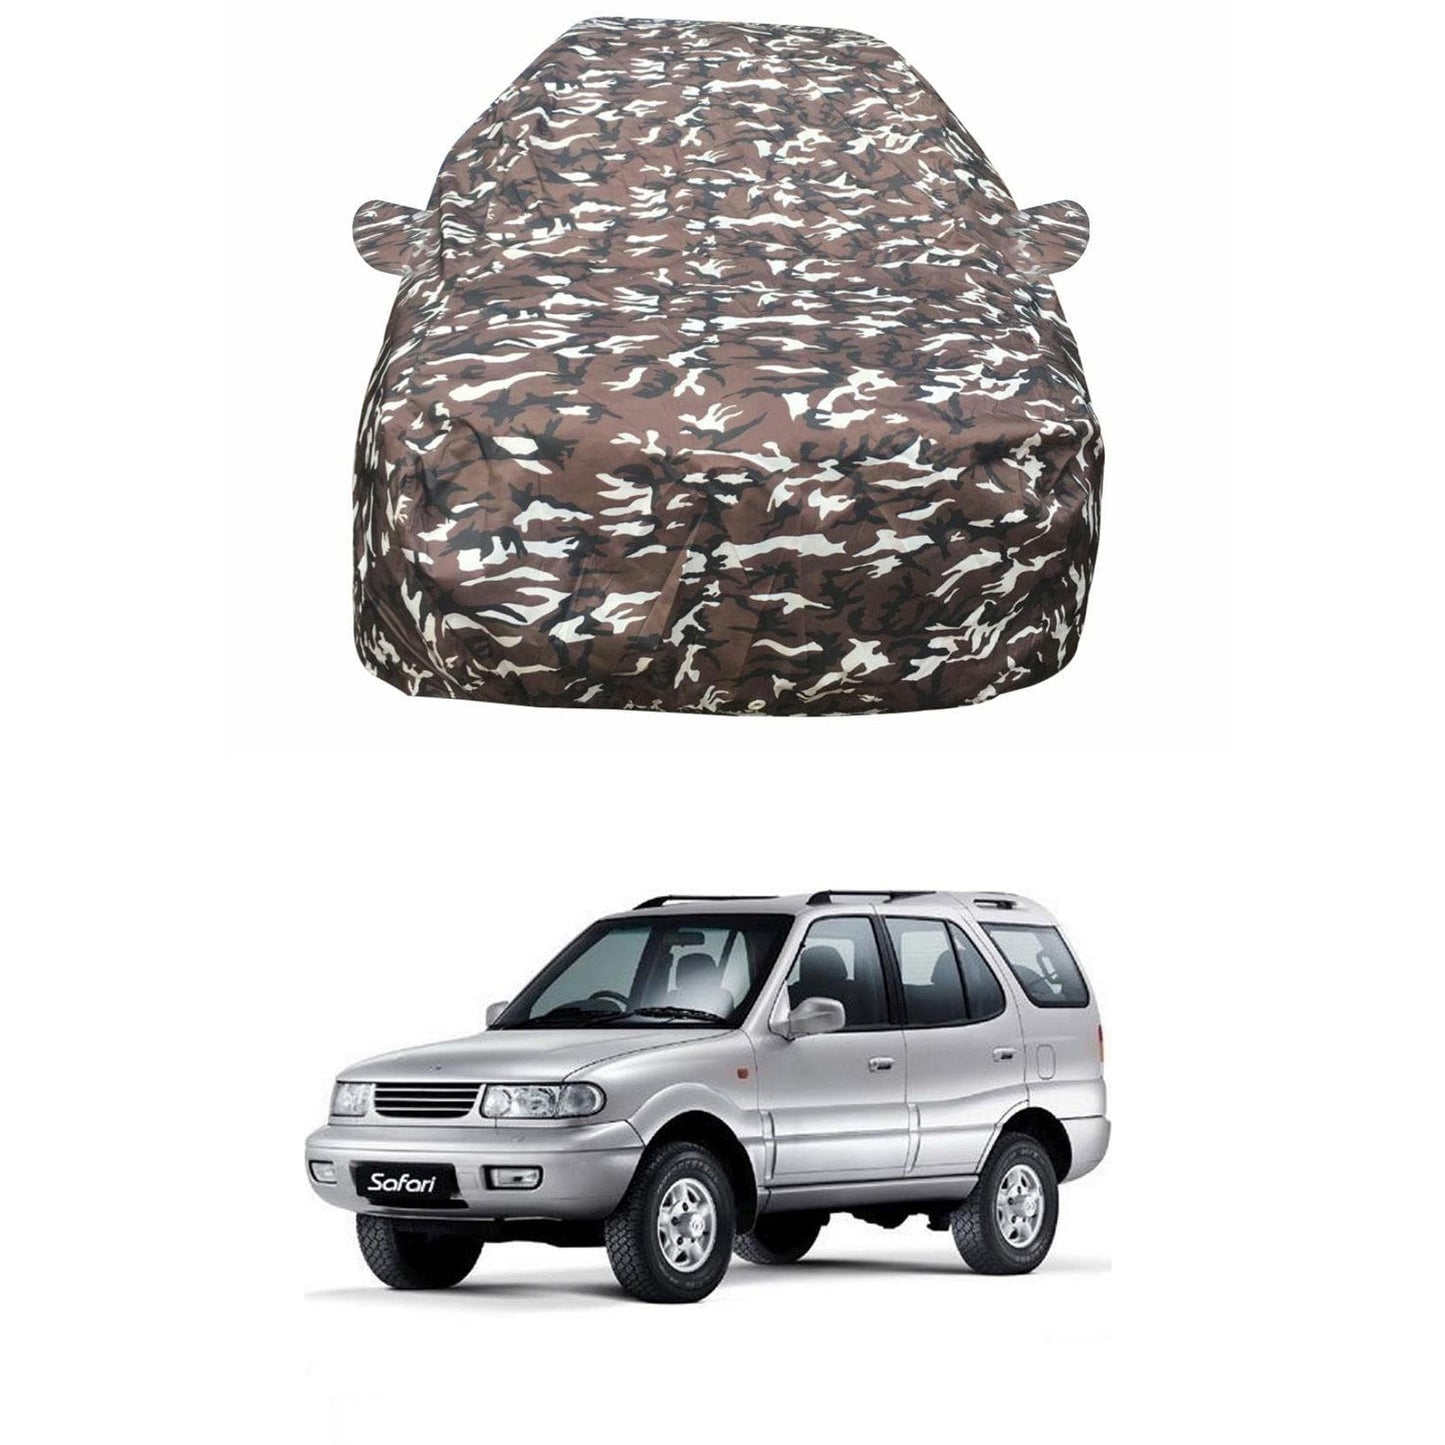 Oshotto Ranger Design Made of 100% Waterproof Fabric Car Body Cover with Mirror Pockets For Tata Safari/Storm